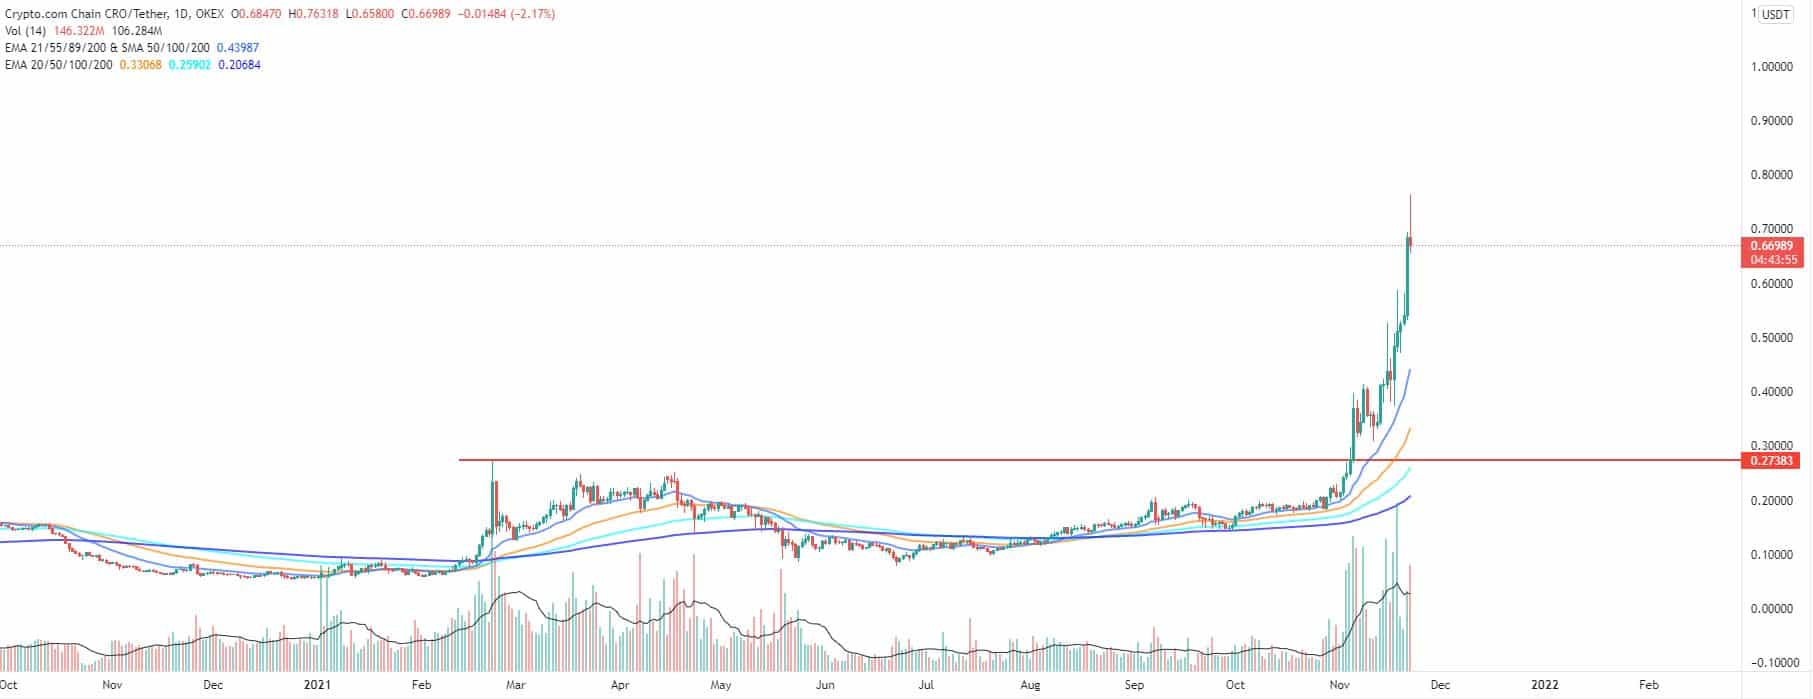 Bitcoin, Ether, Major Altcoins - Weekly Market Update November 22, 2021 - 3